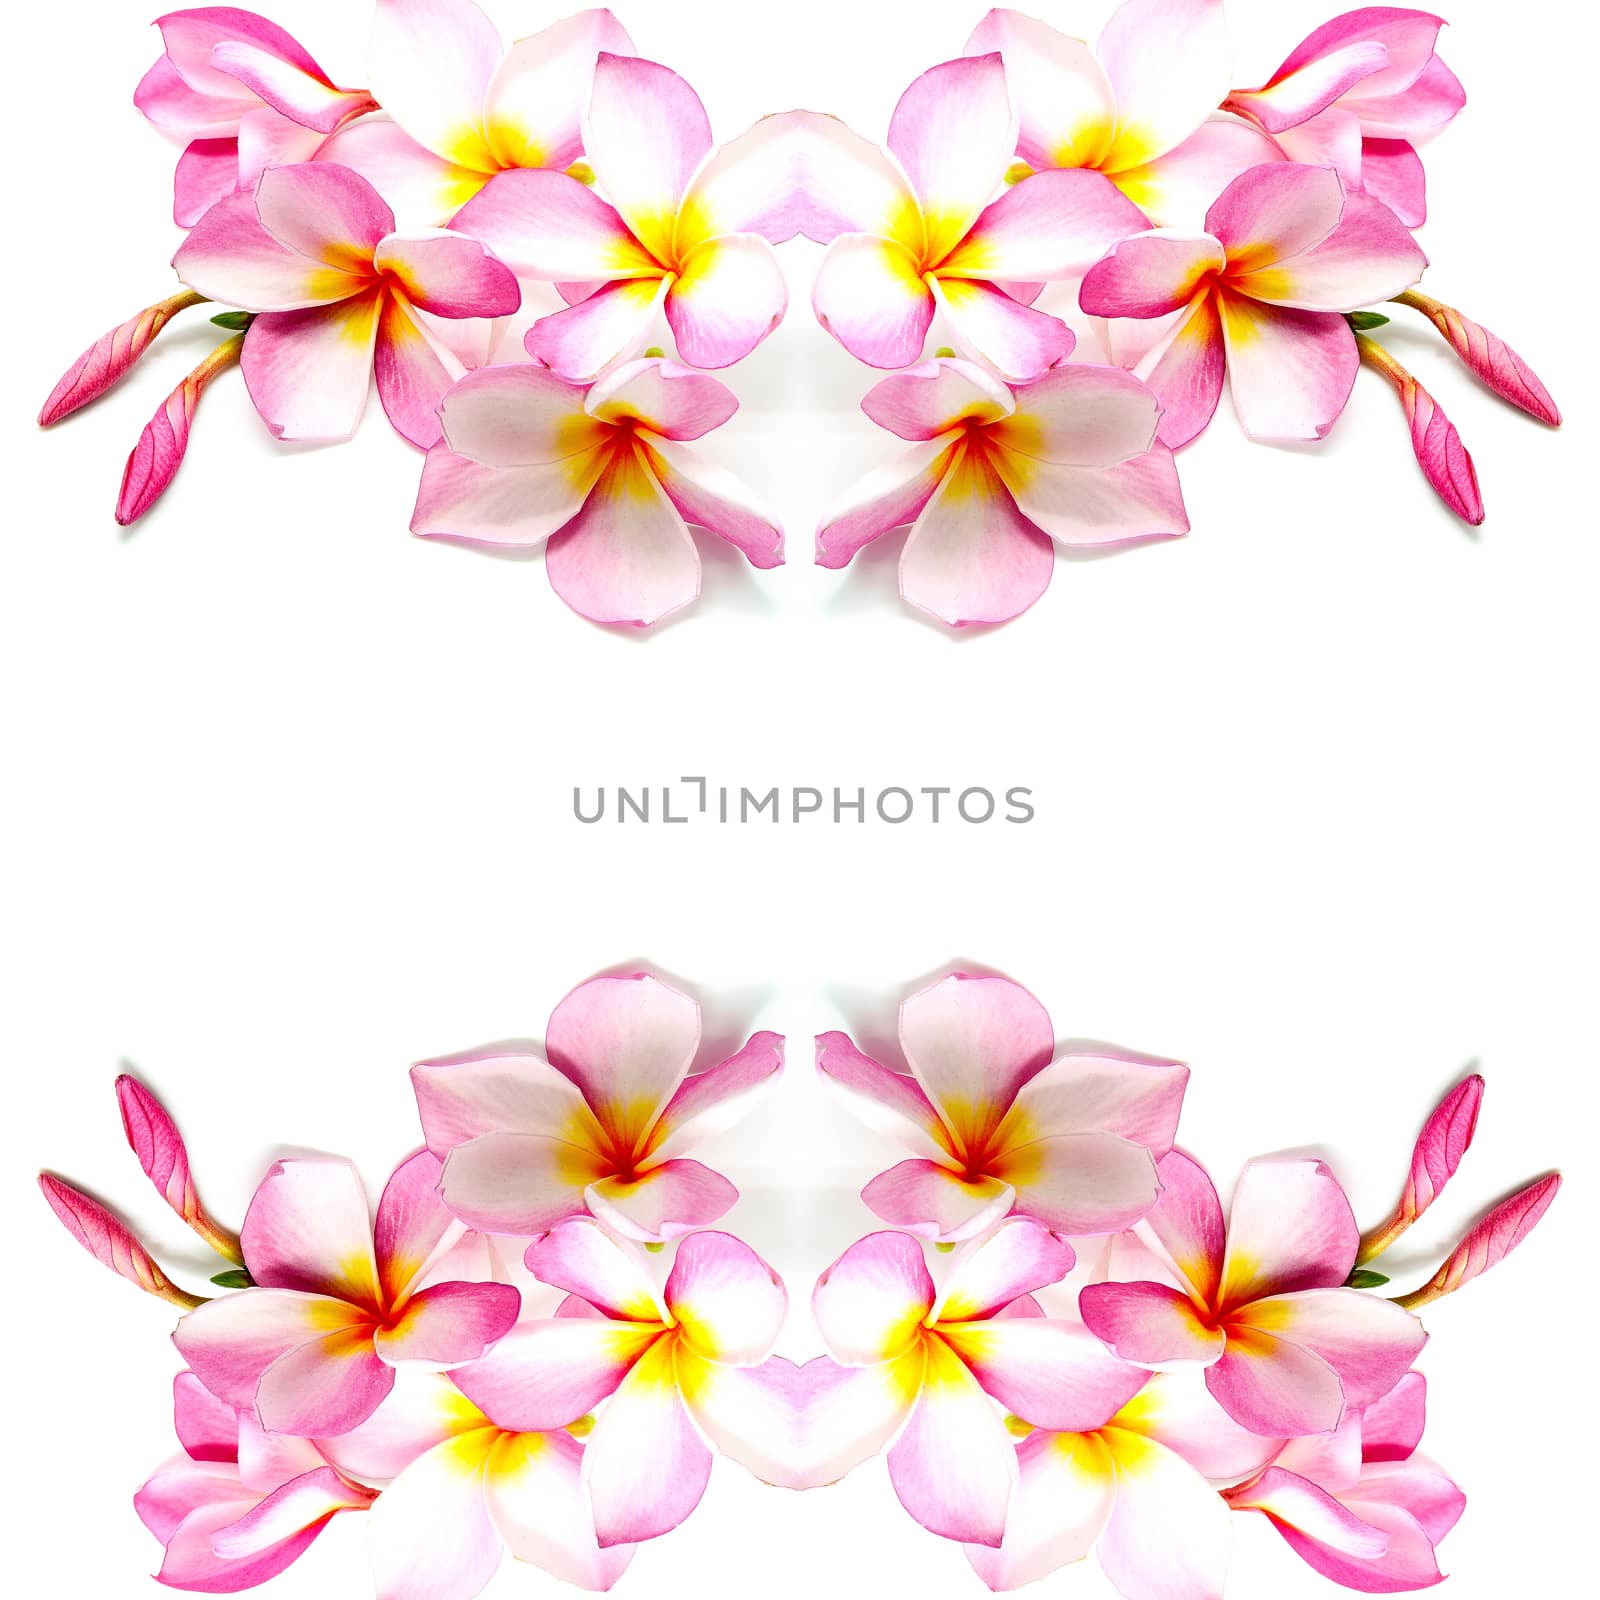 Tropical pink Plumeria or Fangipani flower, isolated on a white background